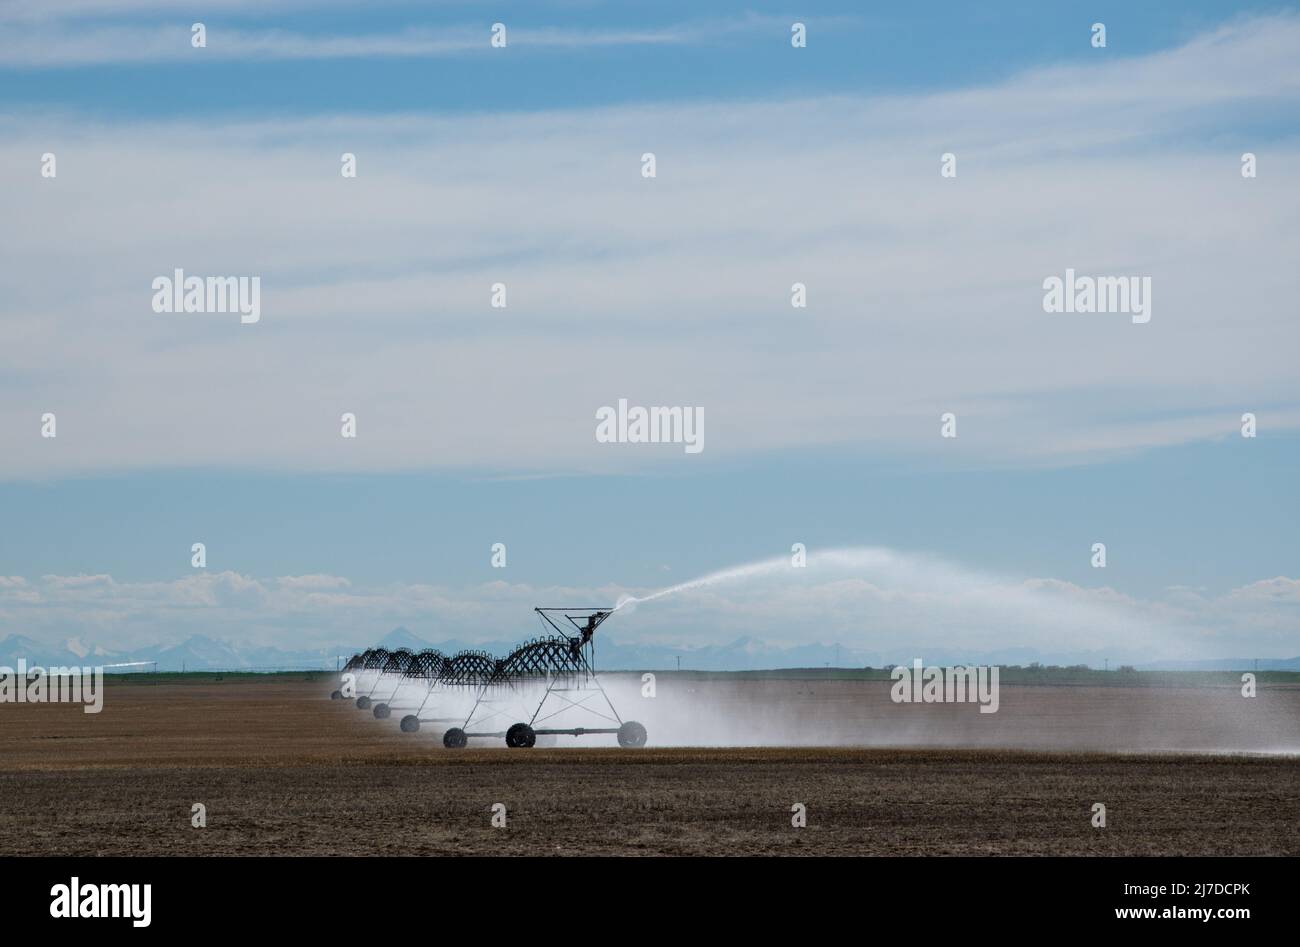 Center pivot irrigation system with low pressure spray nozzles on a field in southern Alberta, Canada. Stock Photo